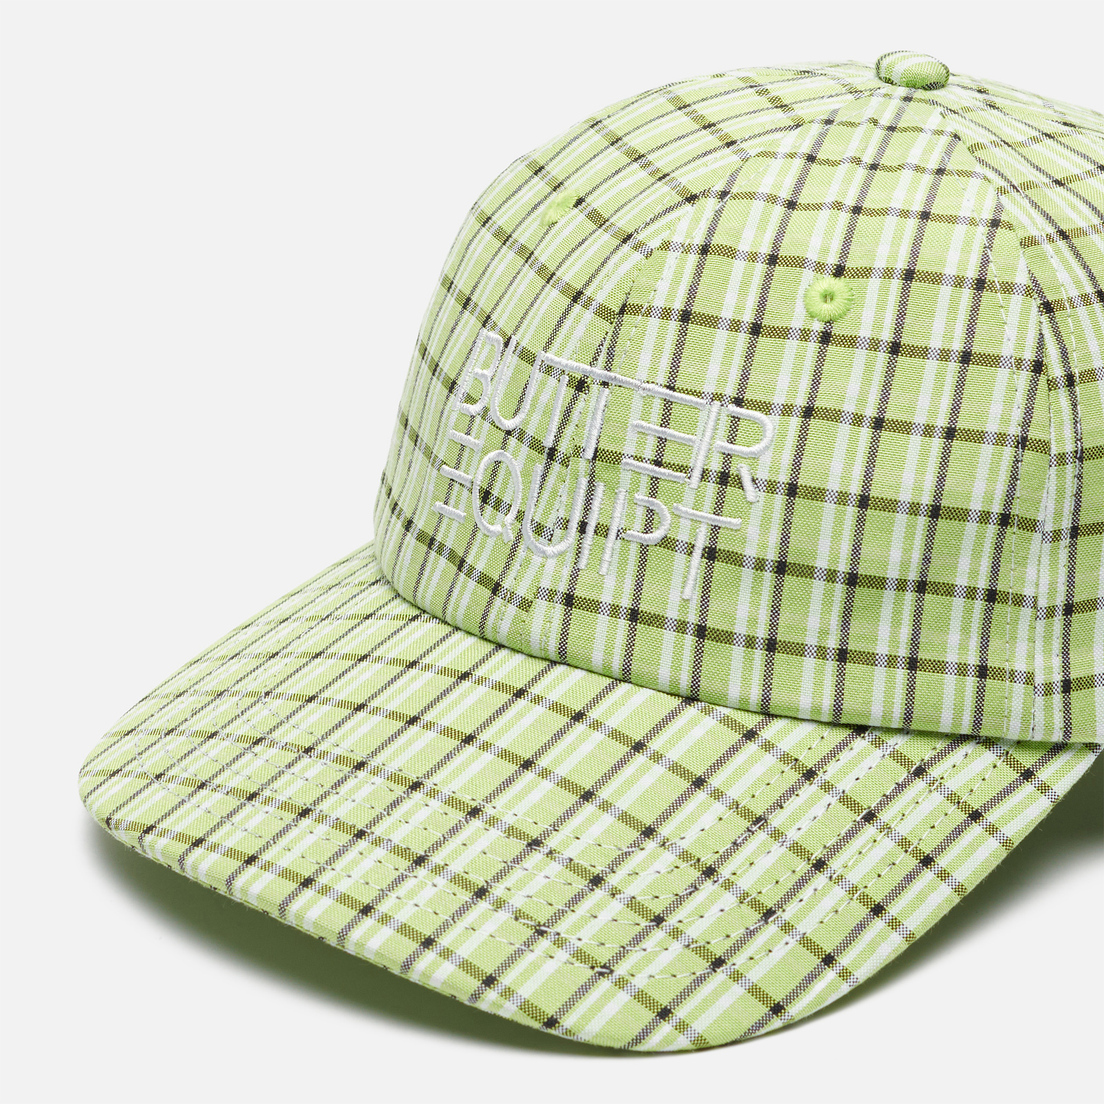 Butter Goods Кепка Equipt Plaid 6 Panel